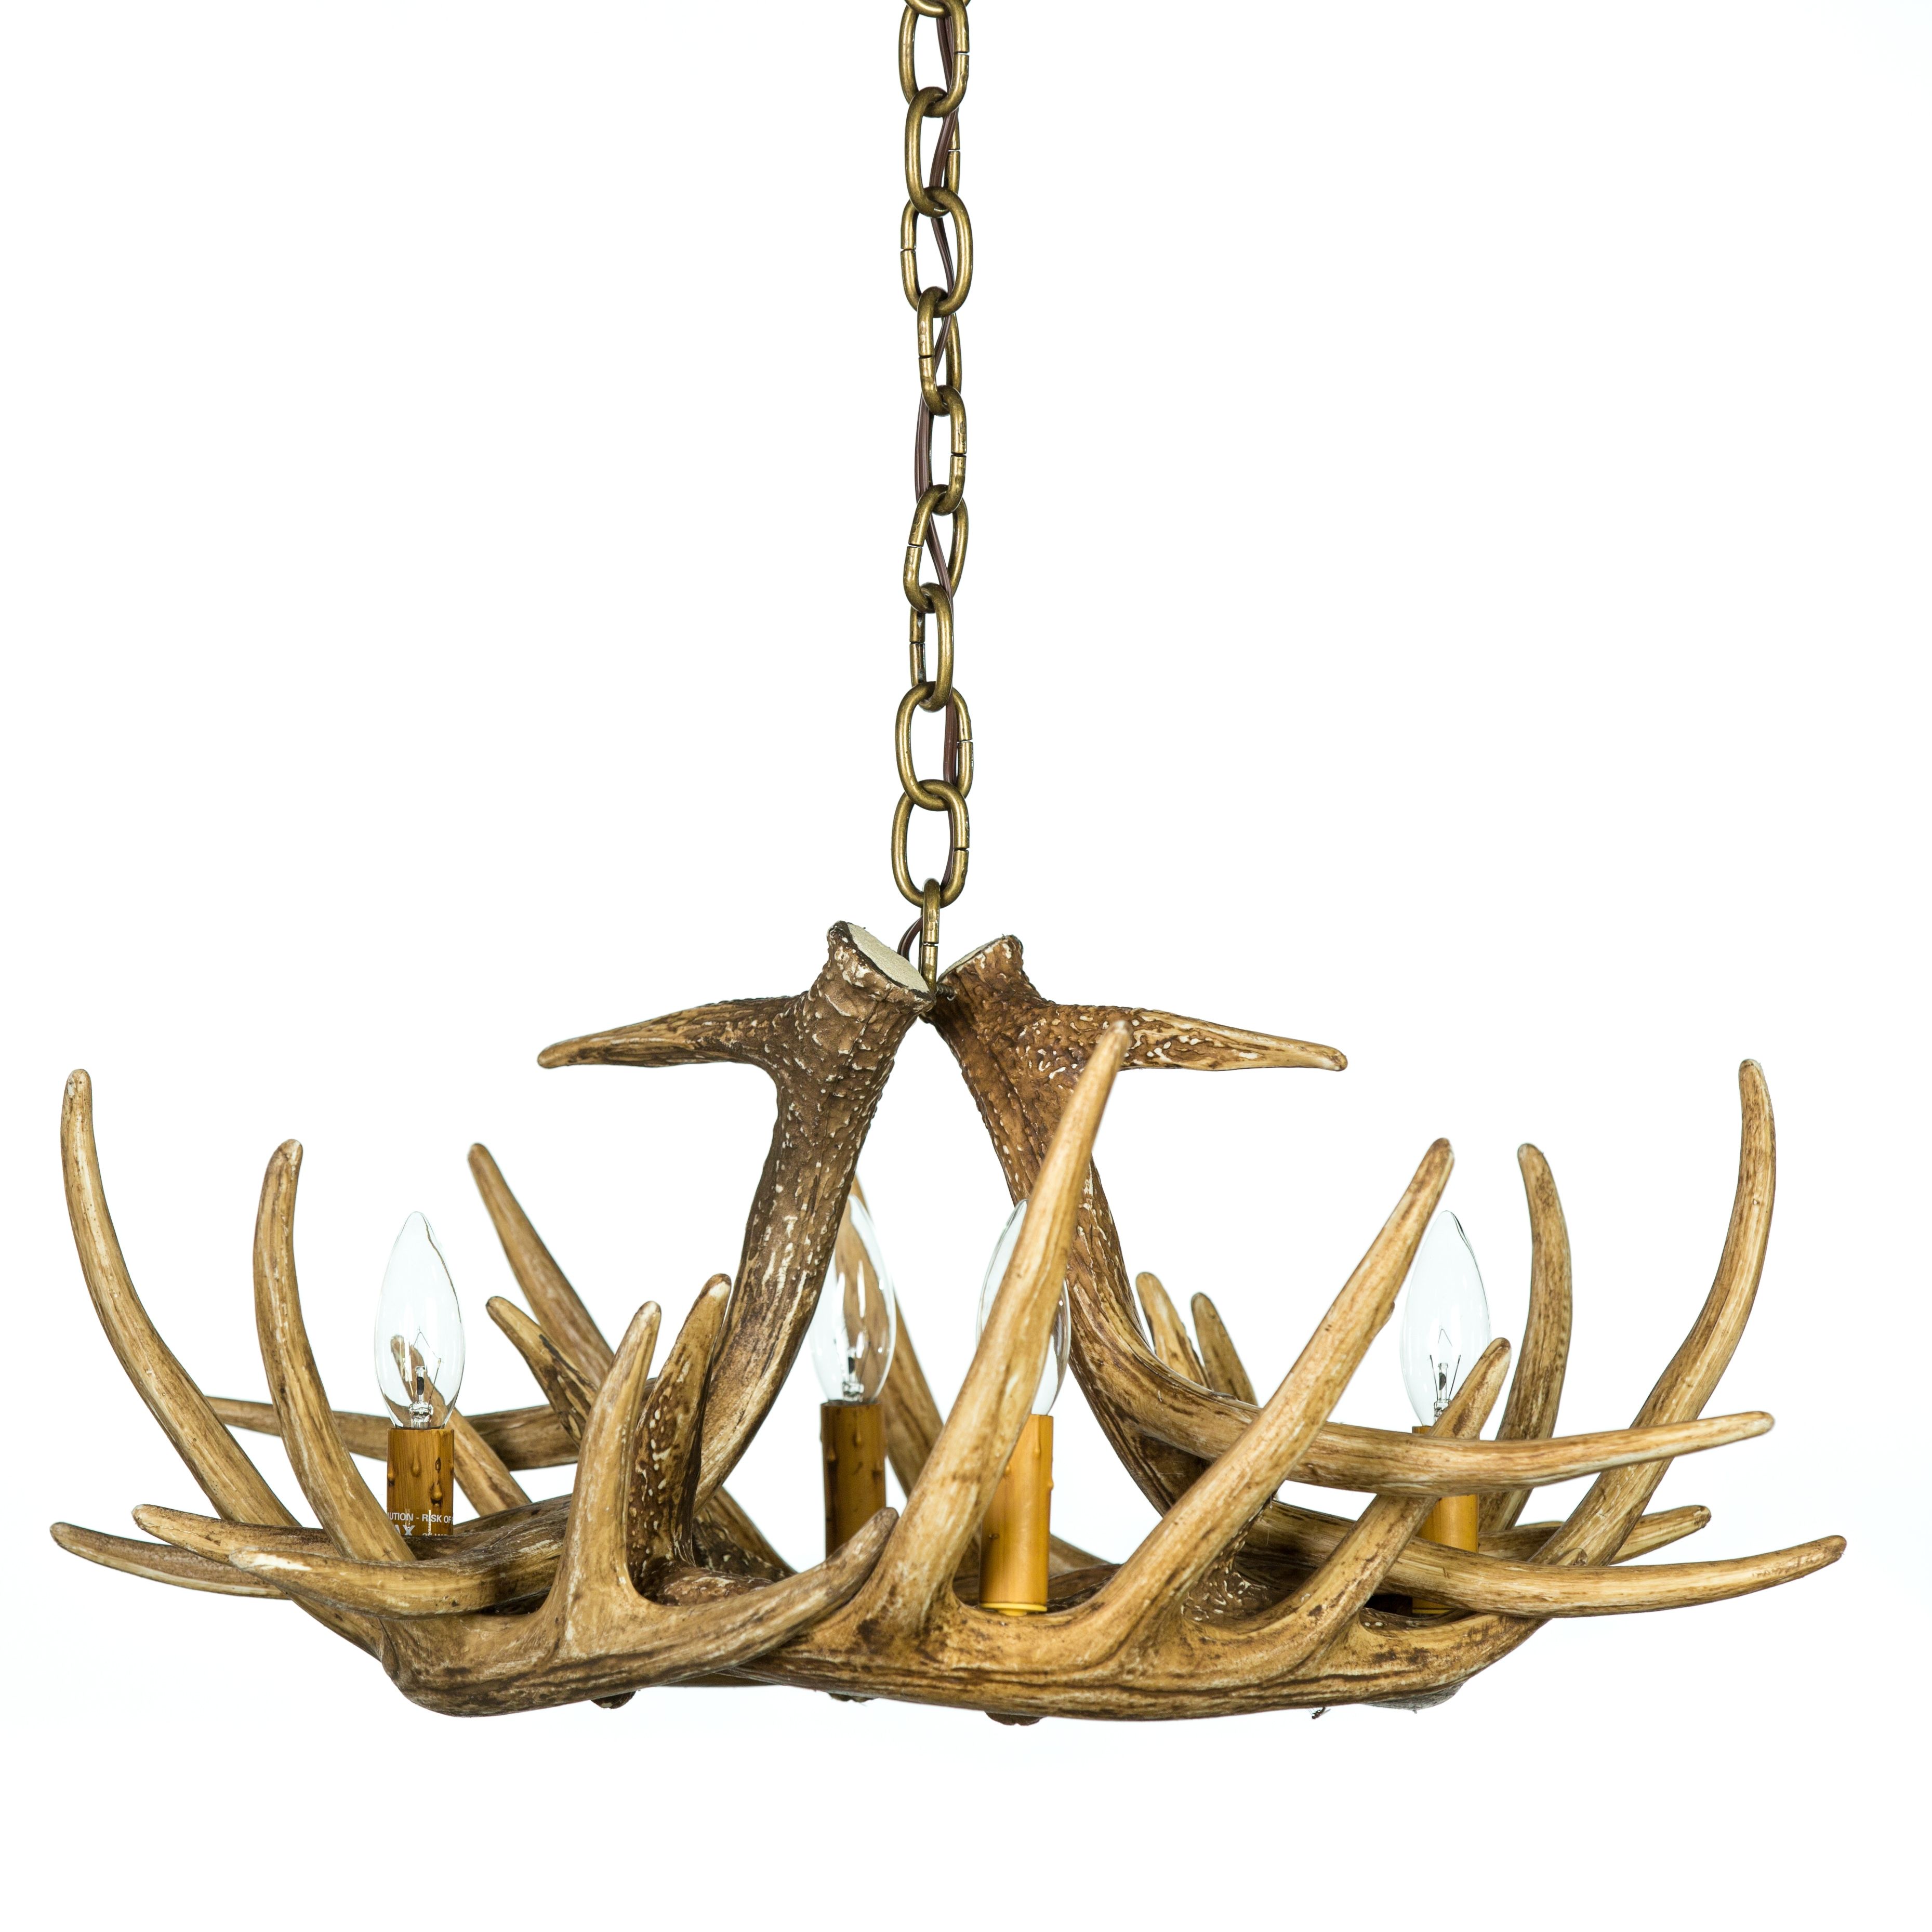 Whitetail Deer 6 Antler Chandelier Cast Horn Designs Pertaining To Antler Chandeliers (View 3 of 12)